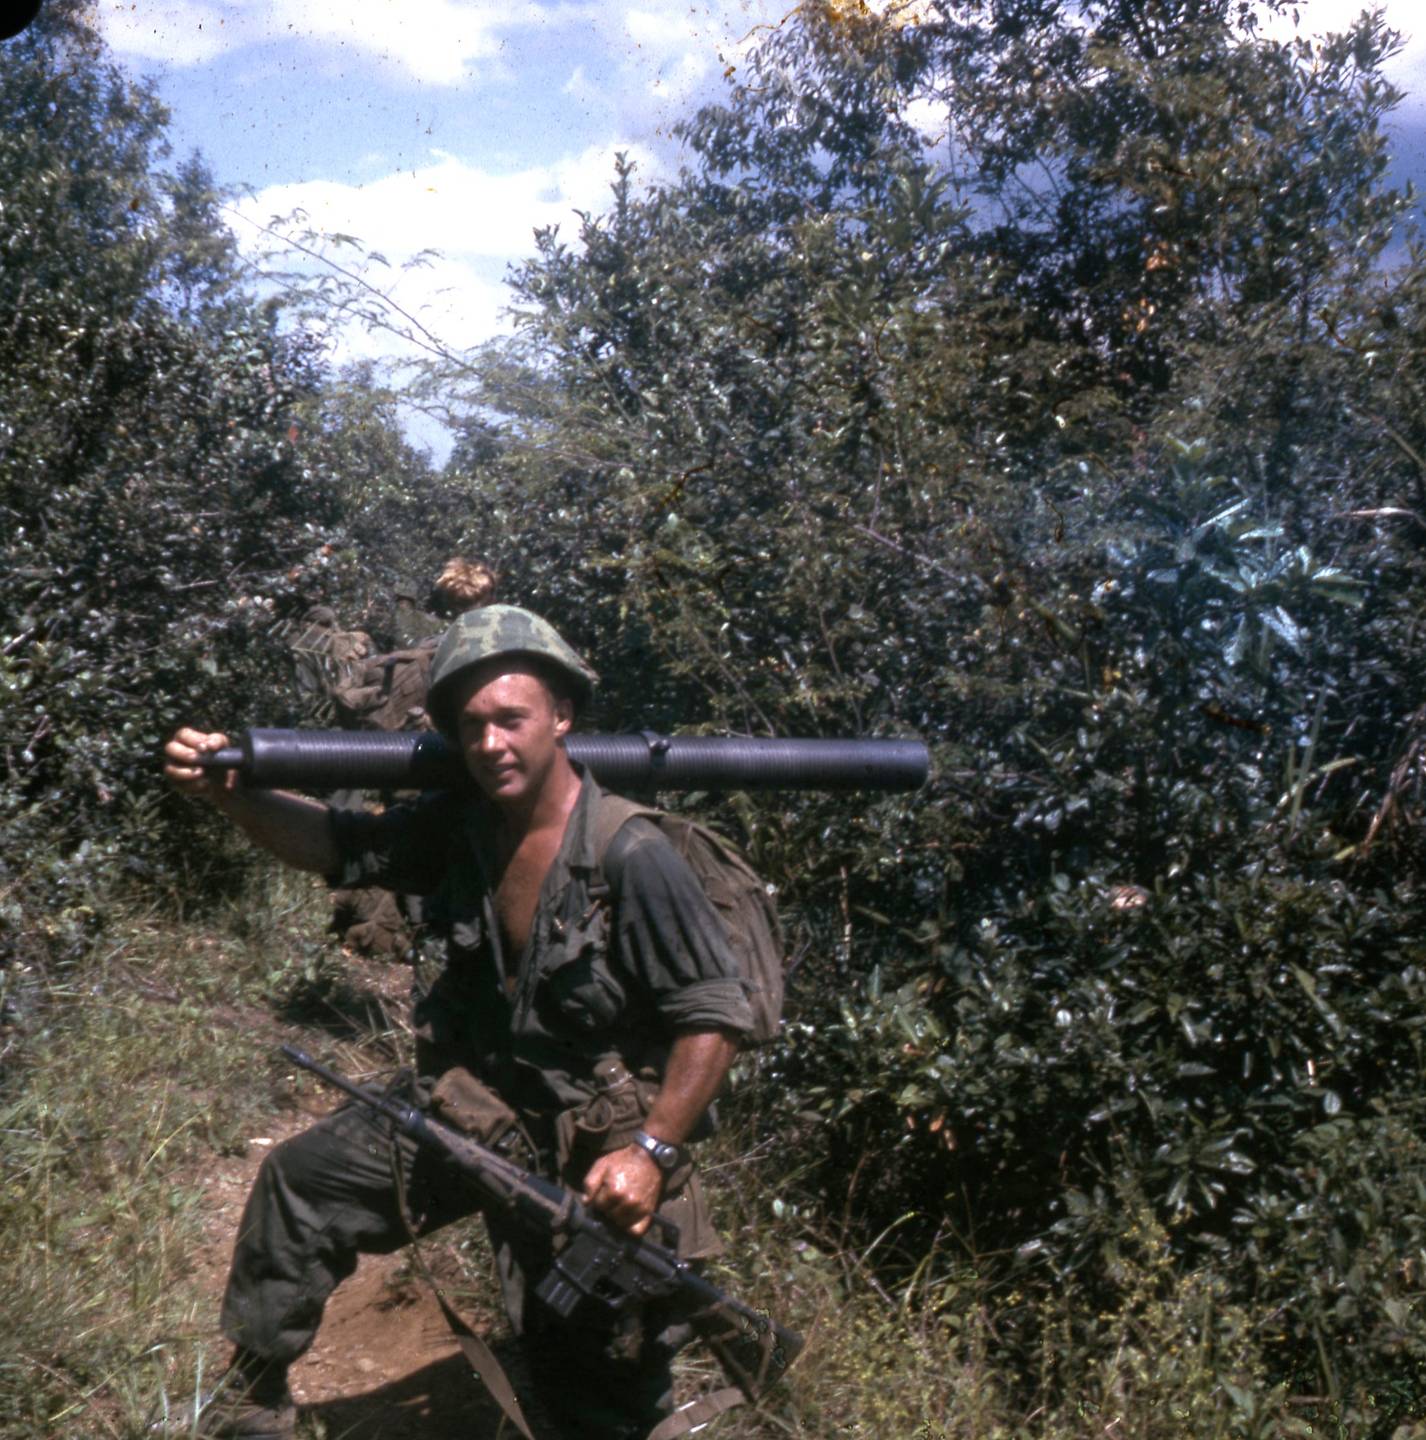 A U.S. soldier with a rifle in hand and a rocket launcher on his shoulder.